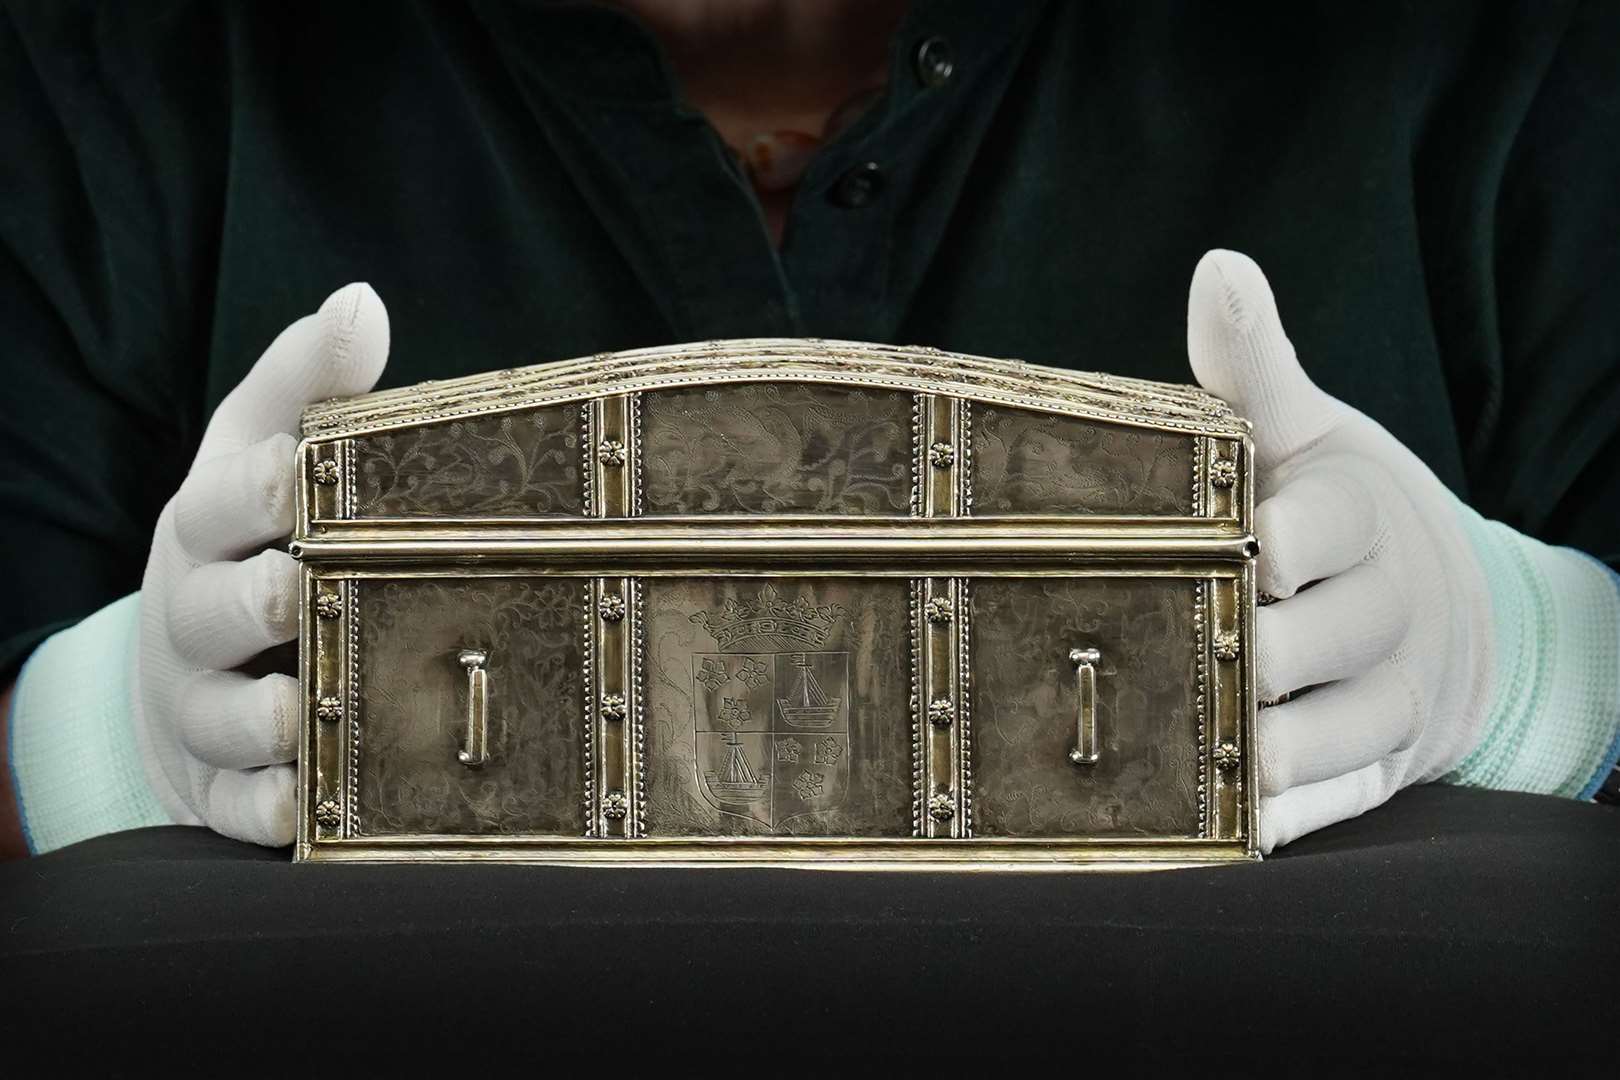 The casket is made of French silver (Stewart Attwood/National Museums Scotland/PA)